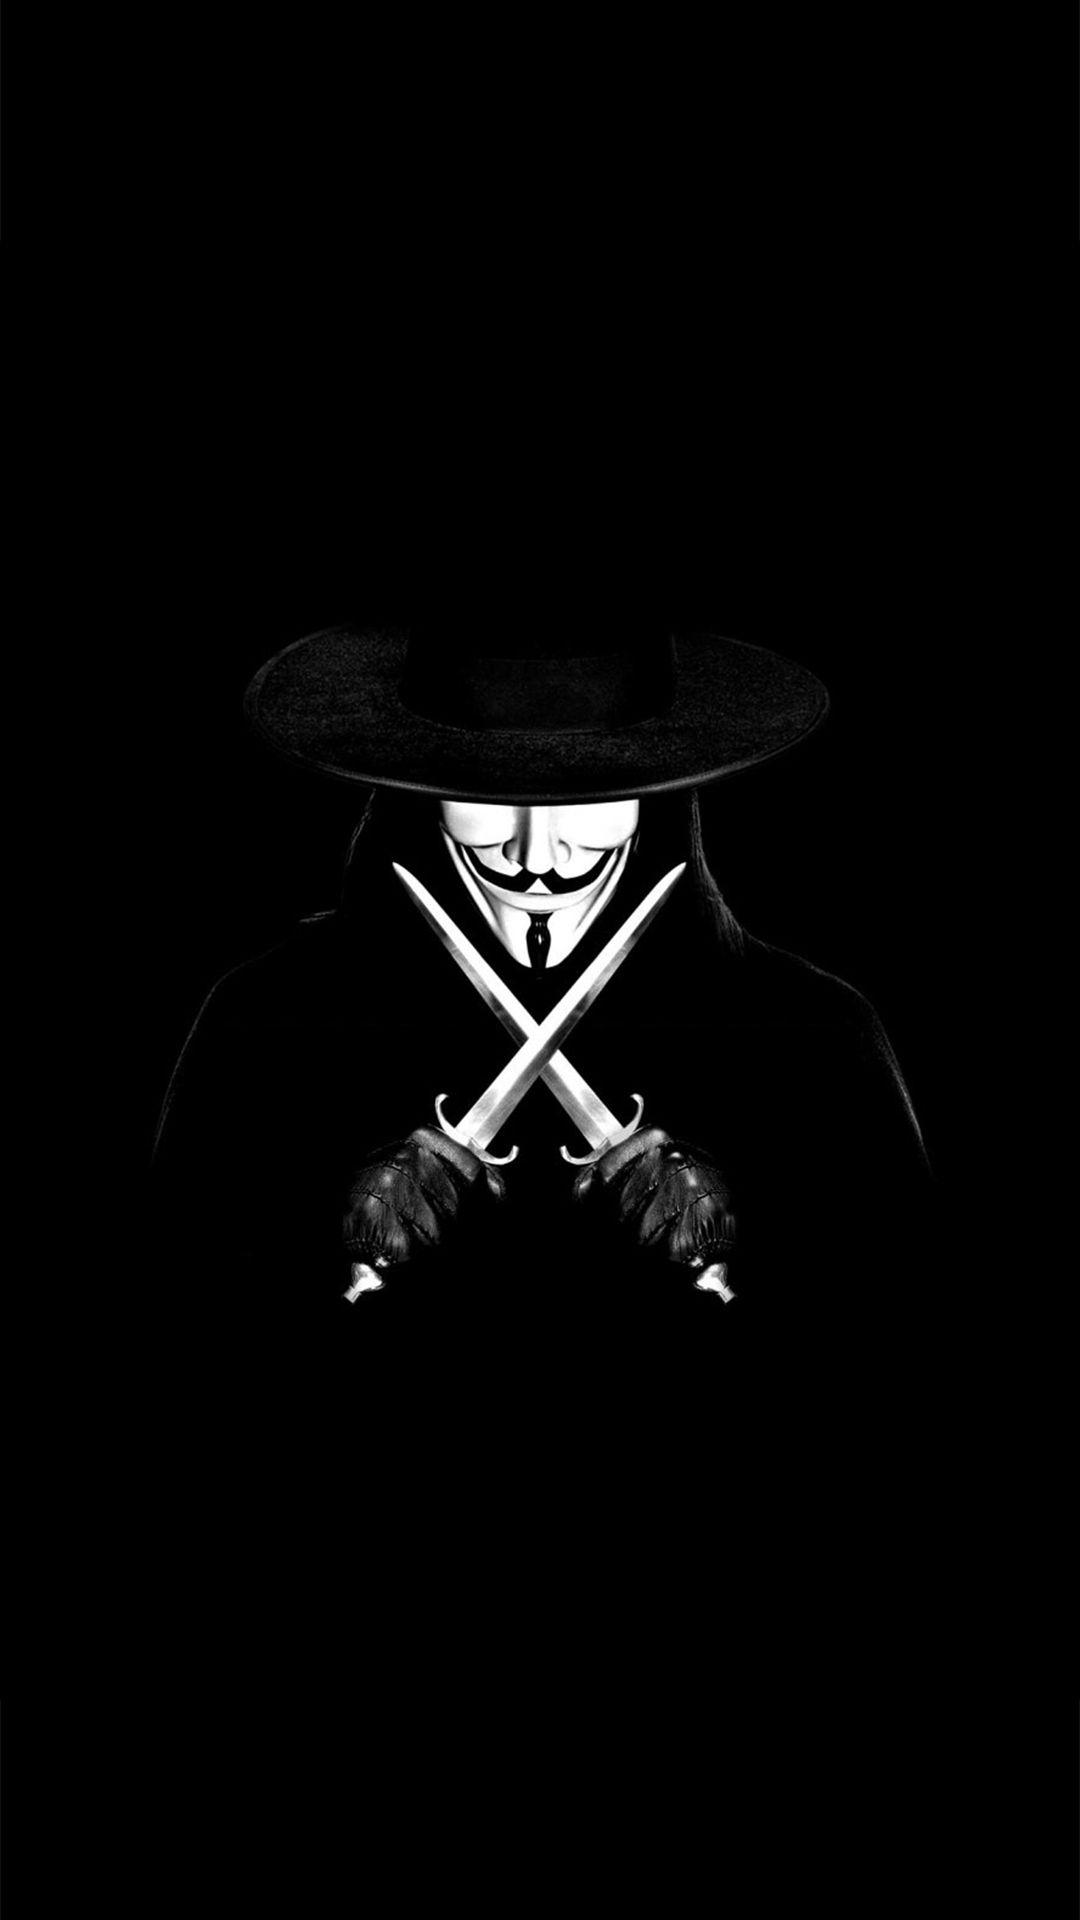 Vendetta Anonymous Guy Fawkes Mask Android Wallpaper free download